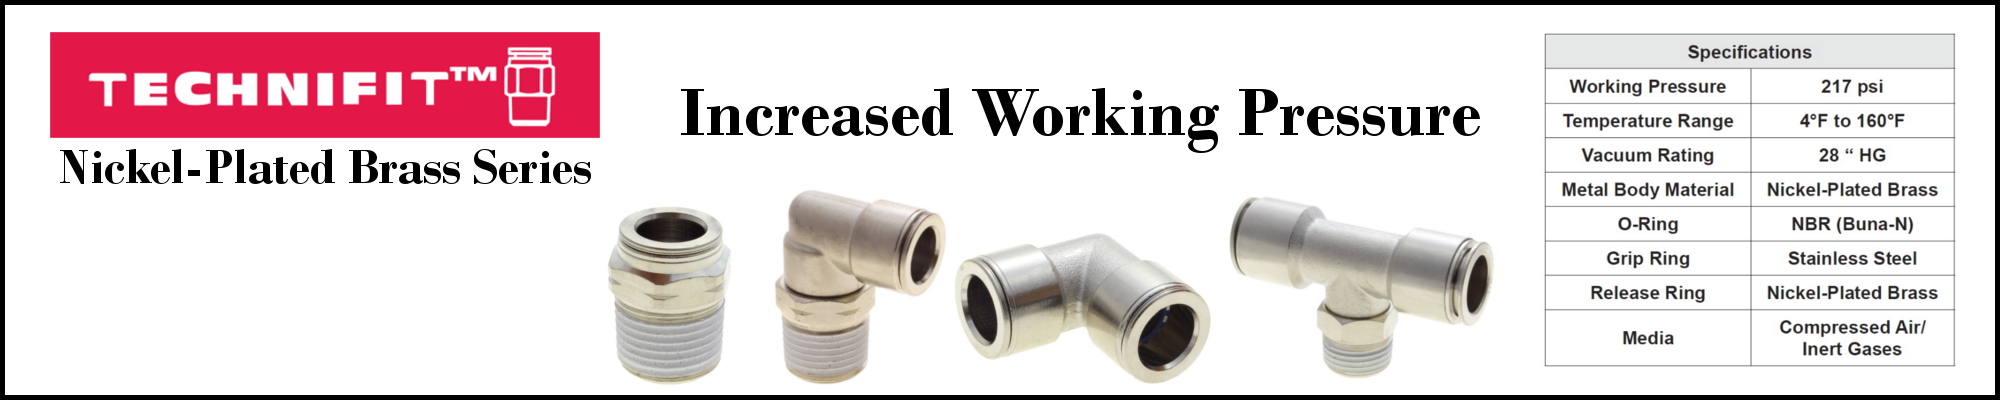 Technifit Nickel-Plated Brass Series Push-to-Connect Fittings